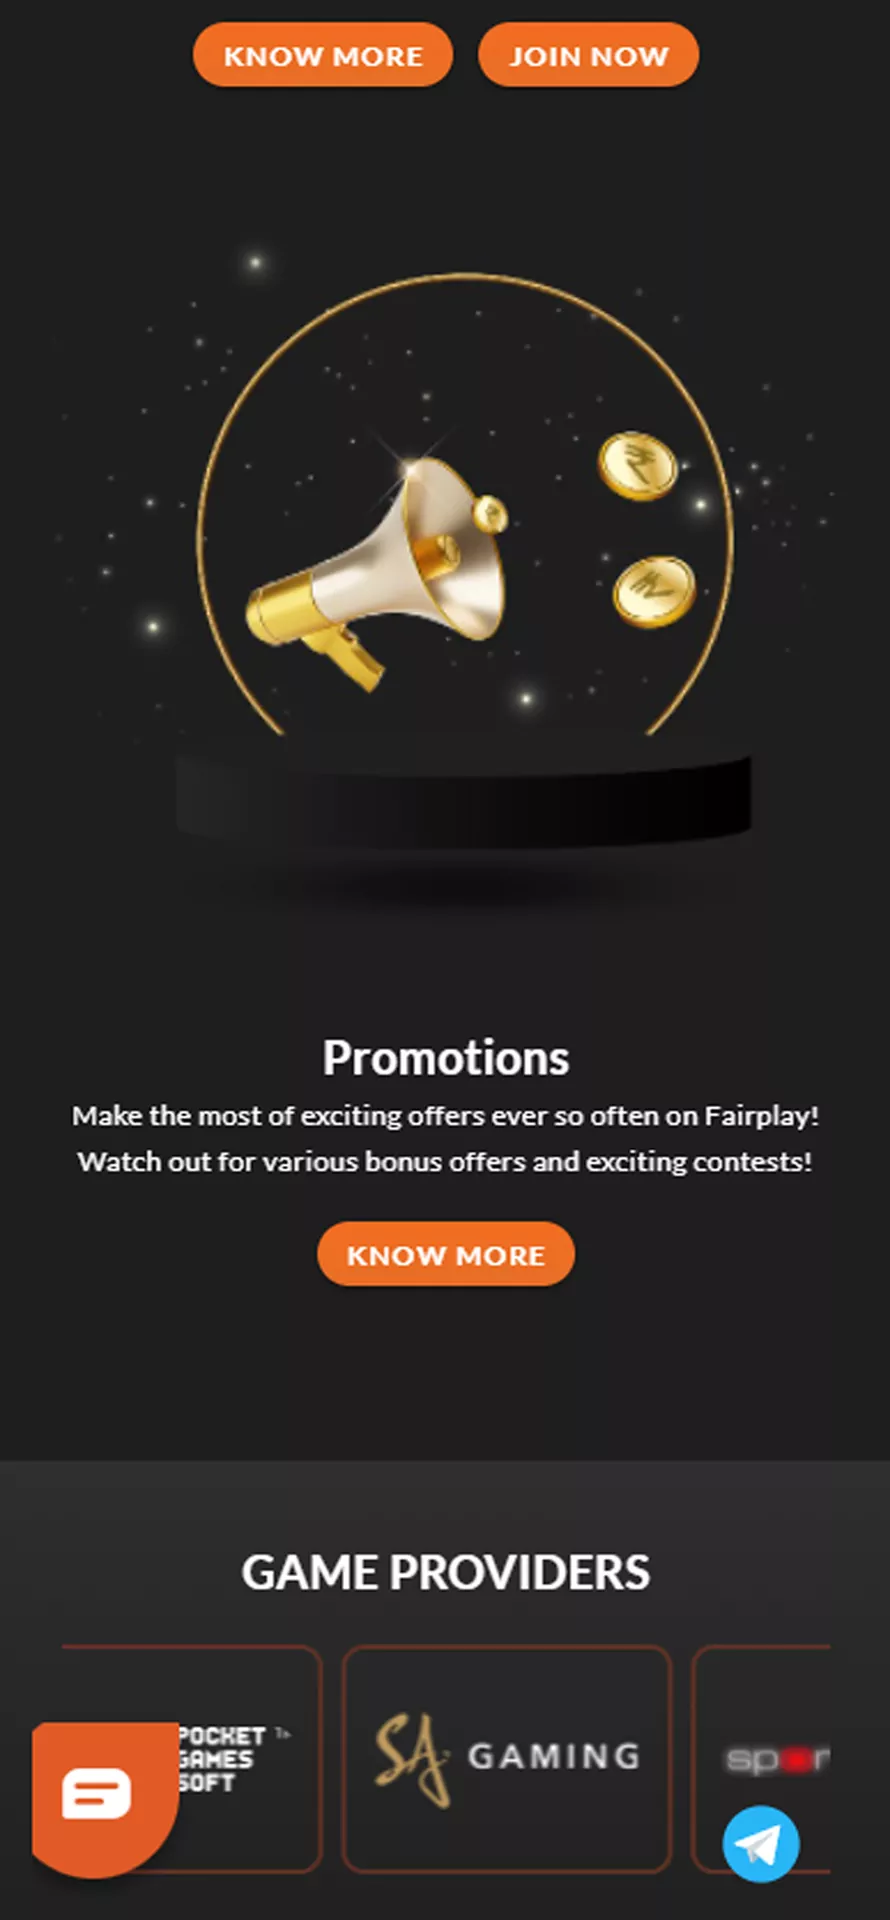 Enable notifications for Fairplay app promotions.